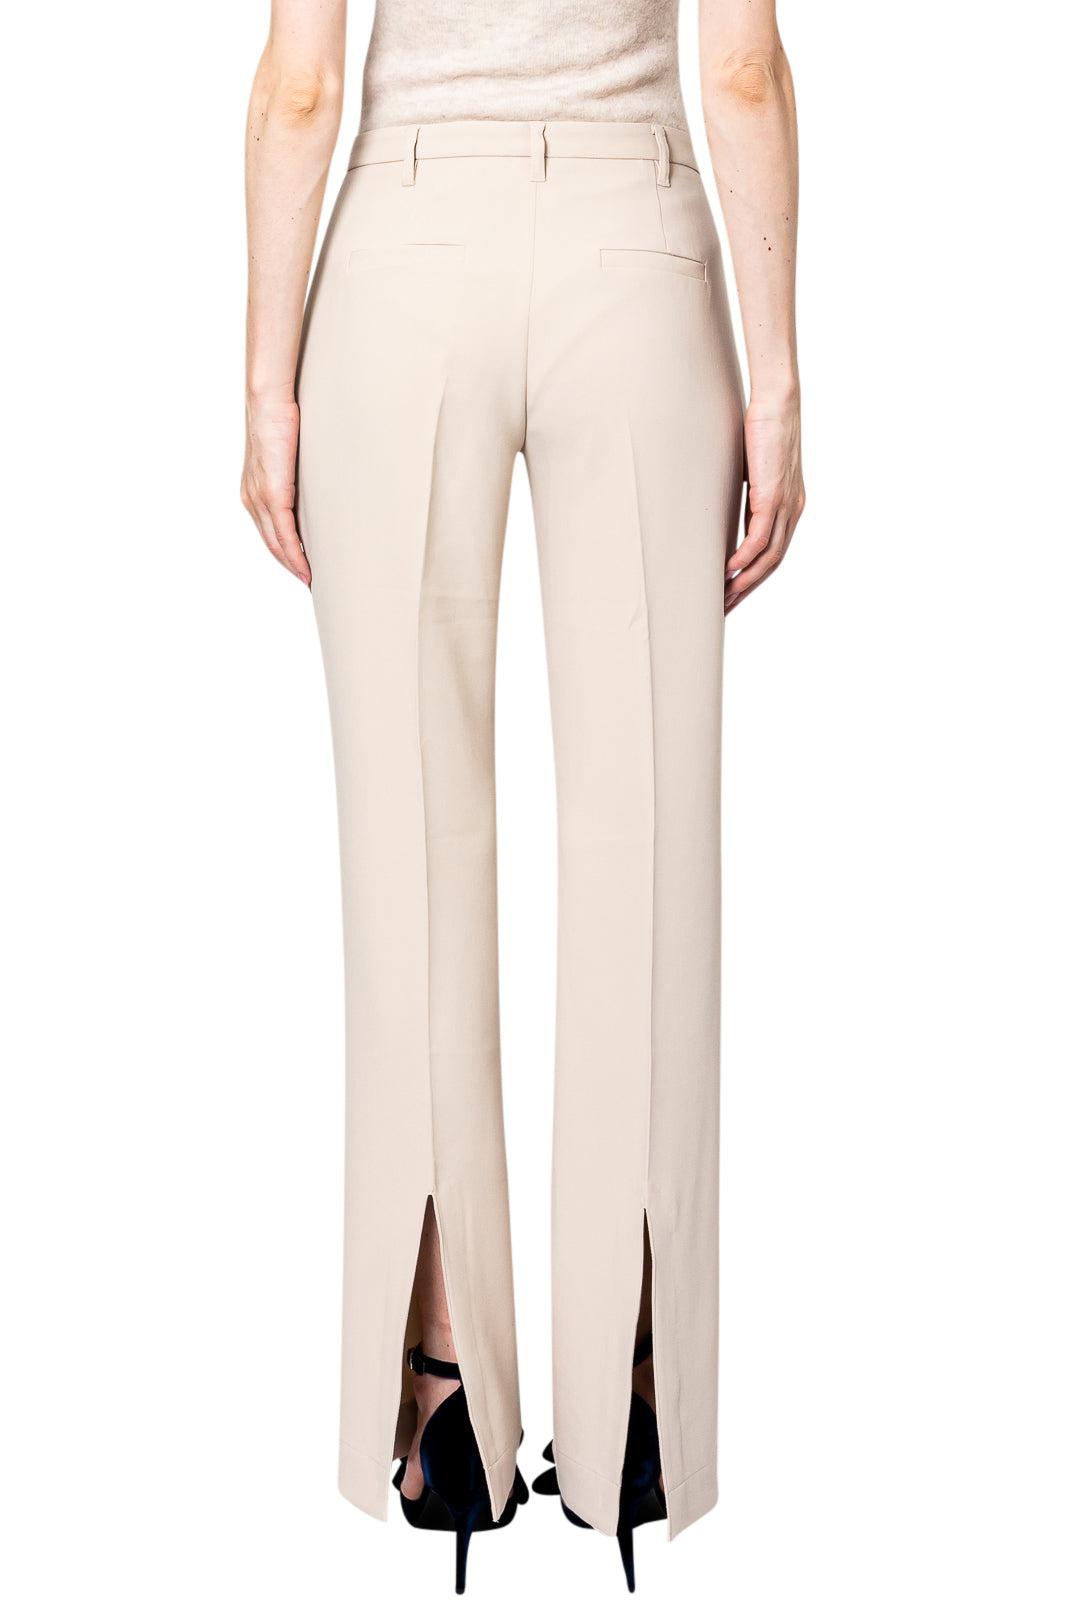 Herskind-Straight tailored trousers-4511668-dgallerystore